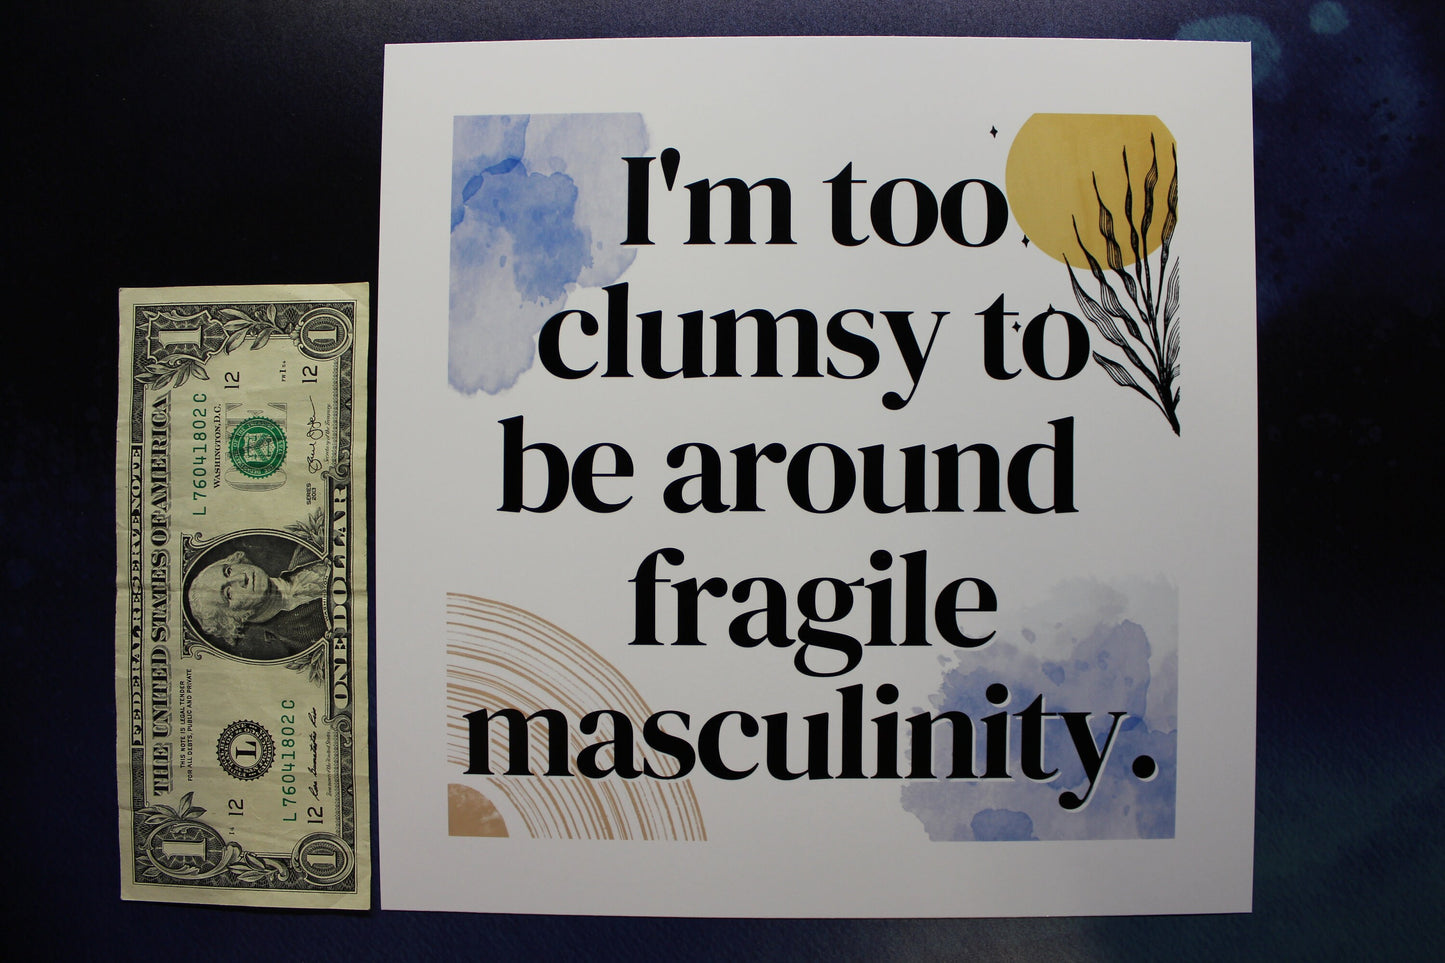 Fragile Masculinity Art Print Ready To Be Framed